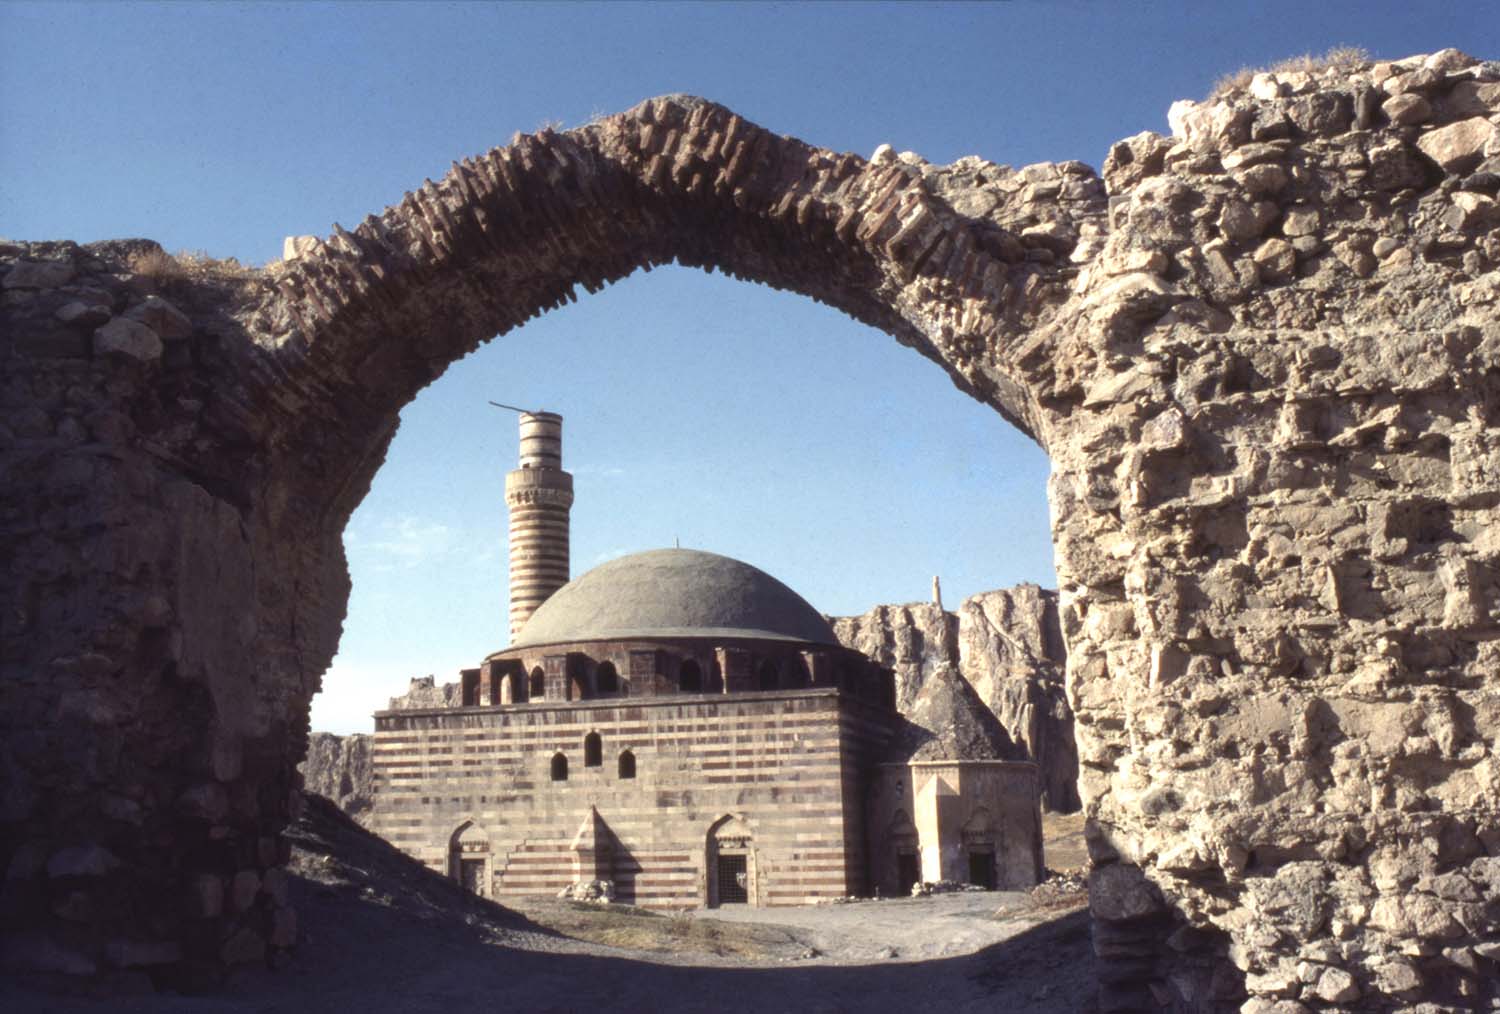 View from south, through the remnants of a city gate.